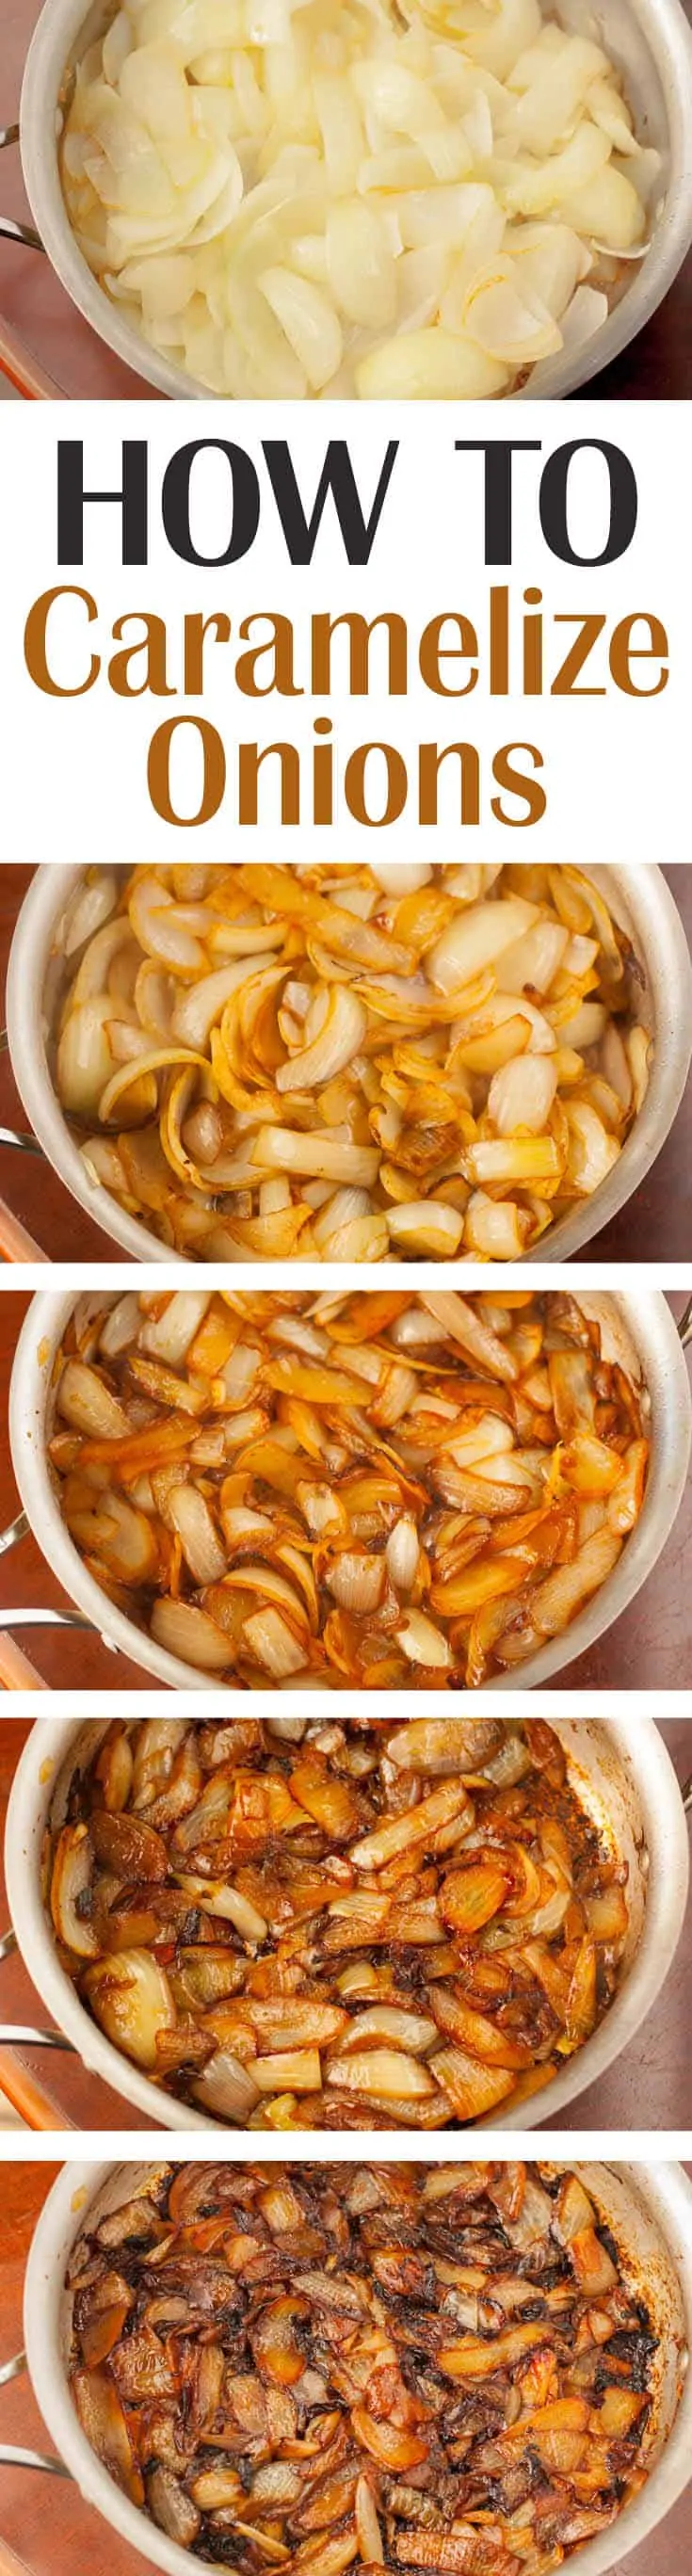 How to Caramelize Onions: An Ultimate Guide on Caramelized Onions